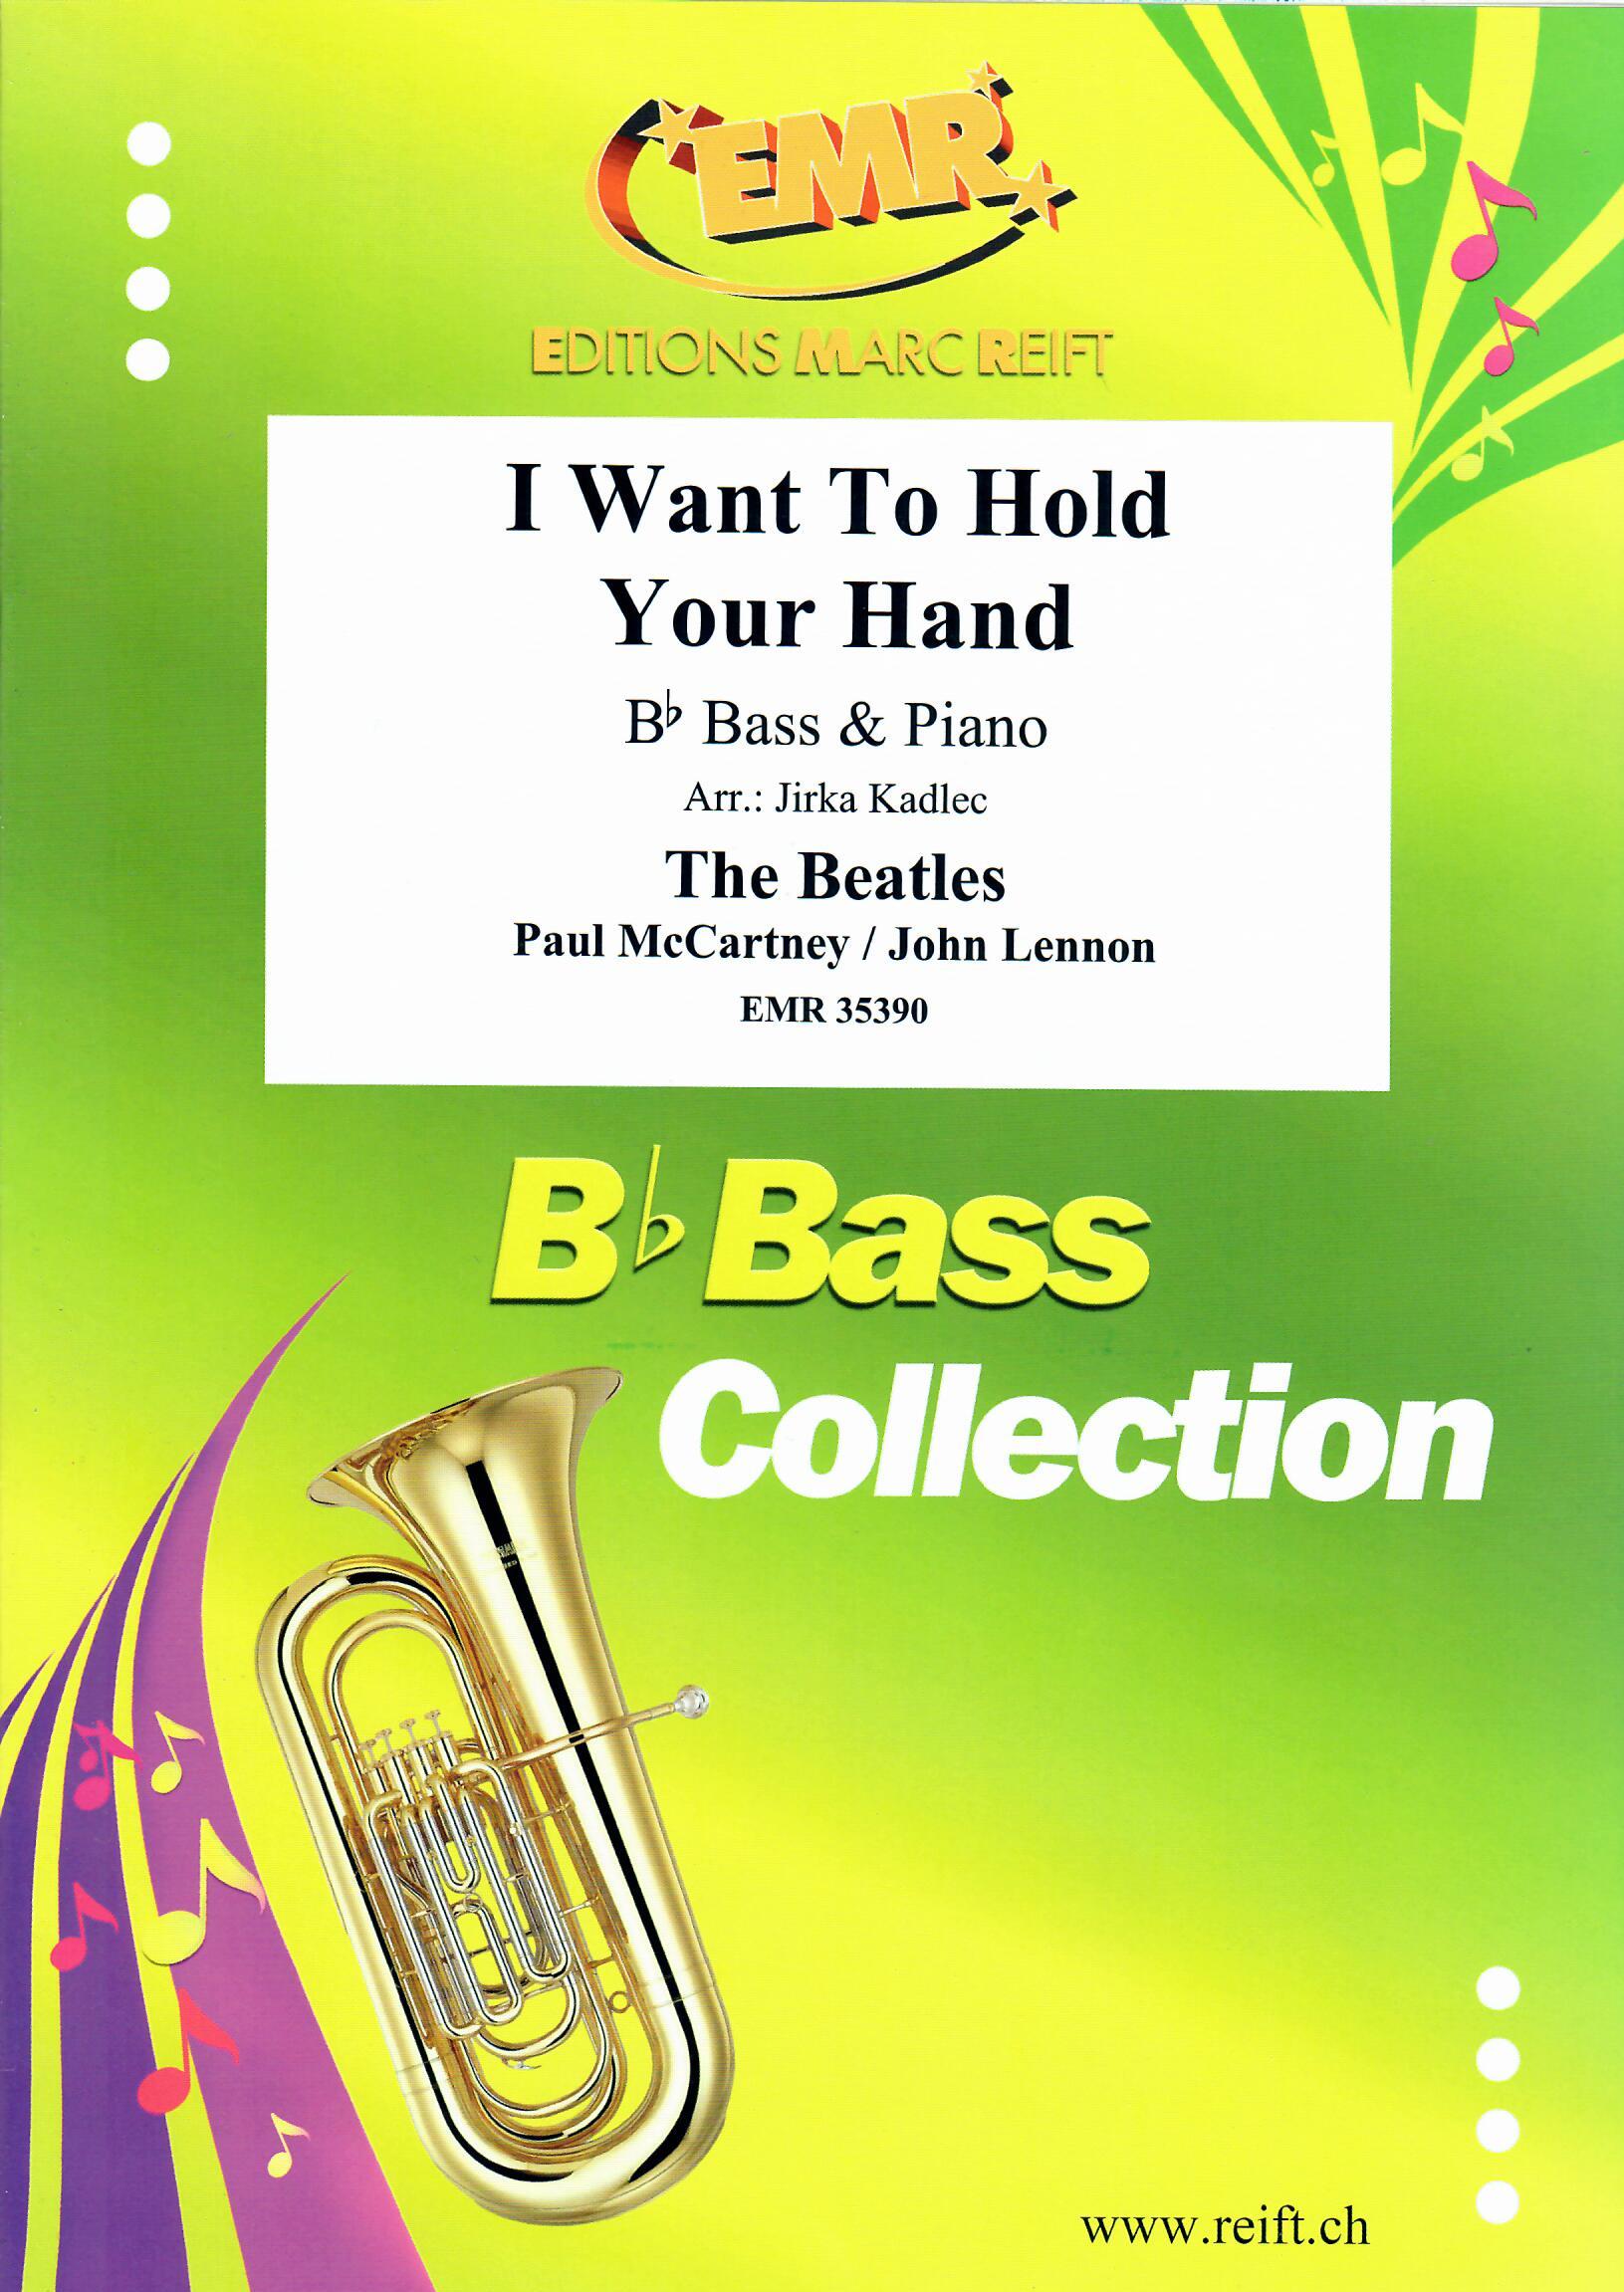 I WANT TO HOLD YOUR HAND, SOLOS - E♭. Bass